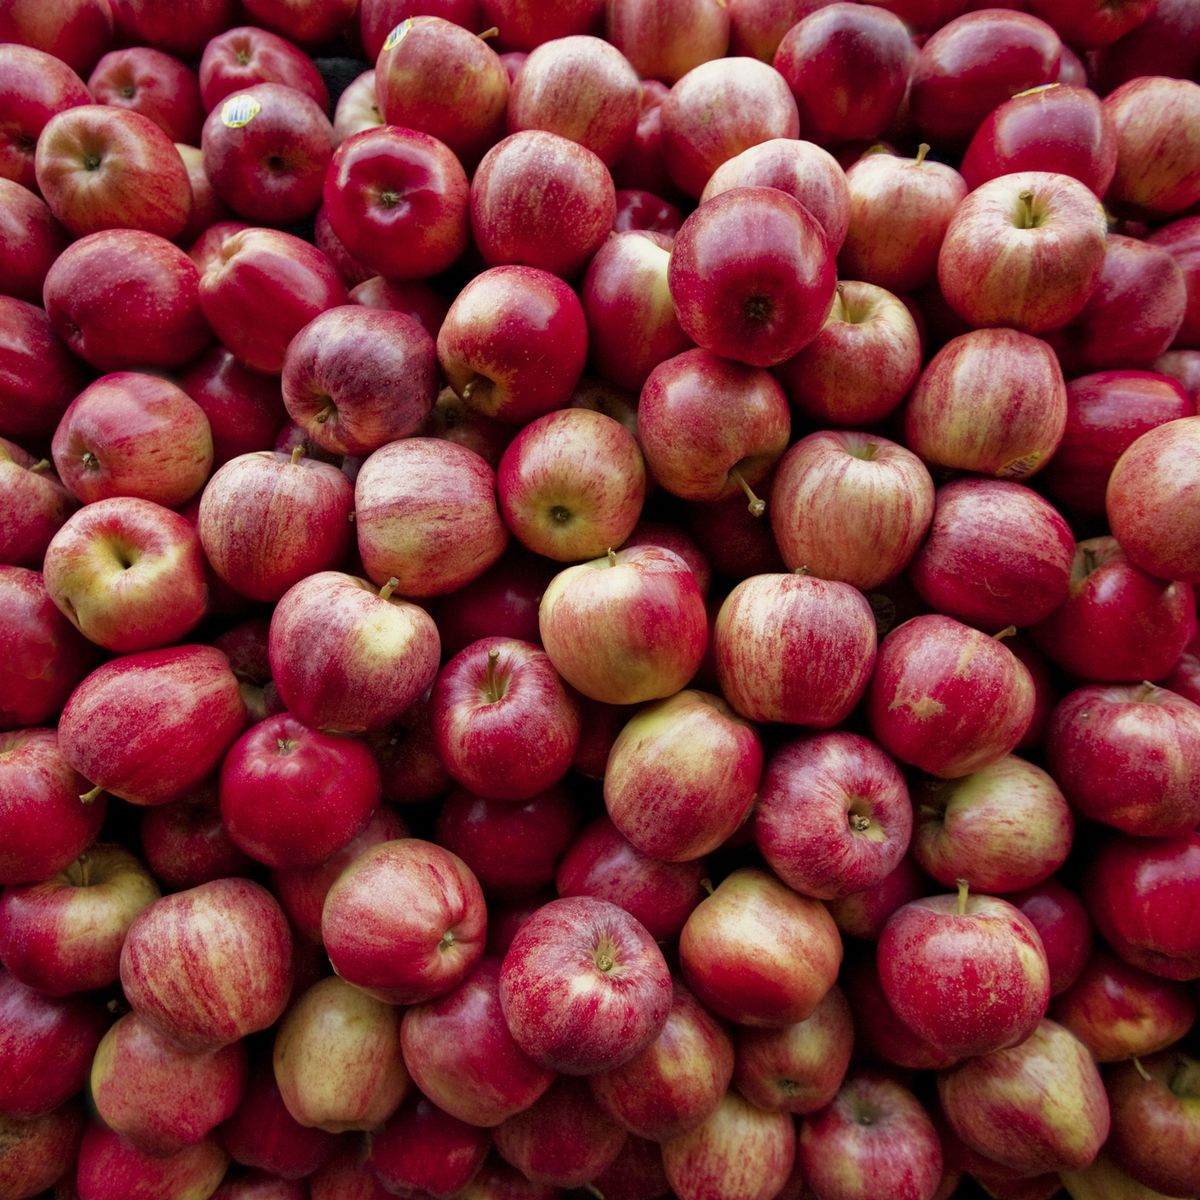 red apples lay in a pile at a fruit stand in maryland, usa